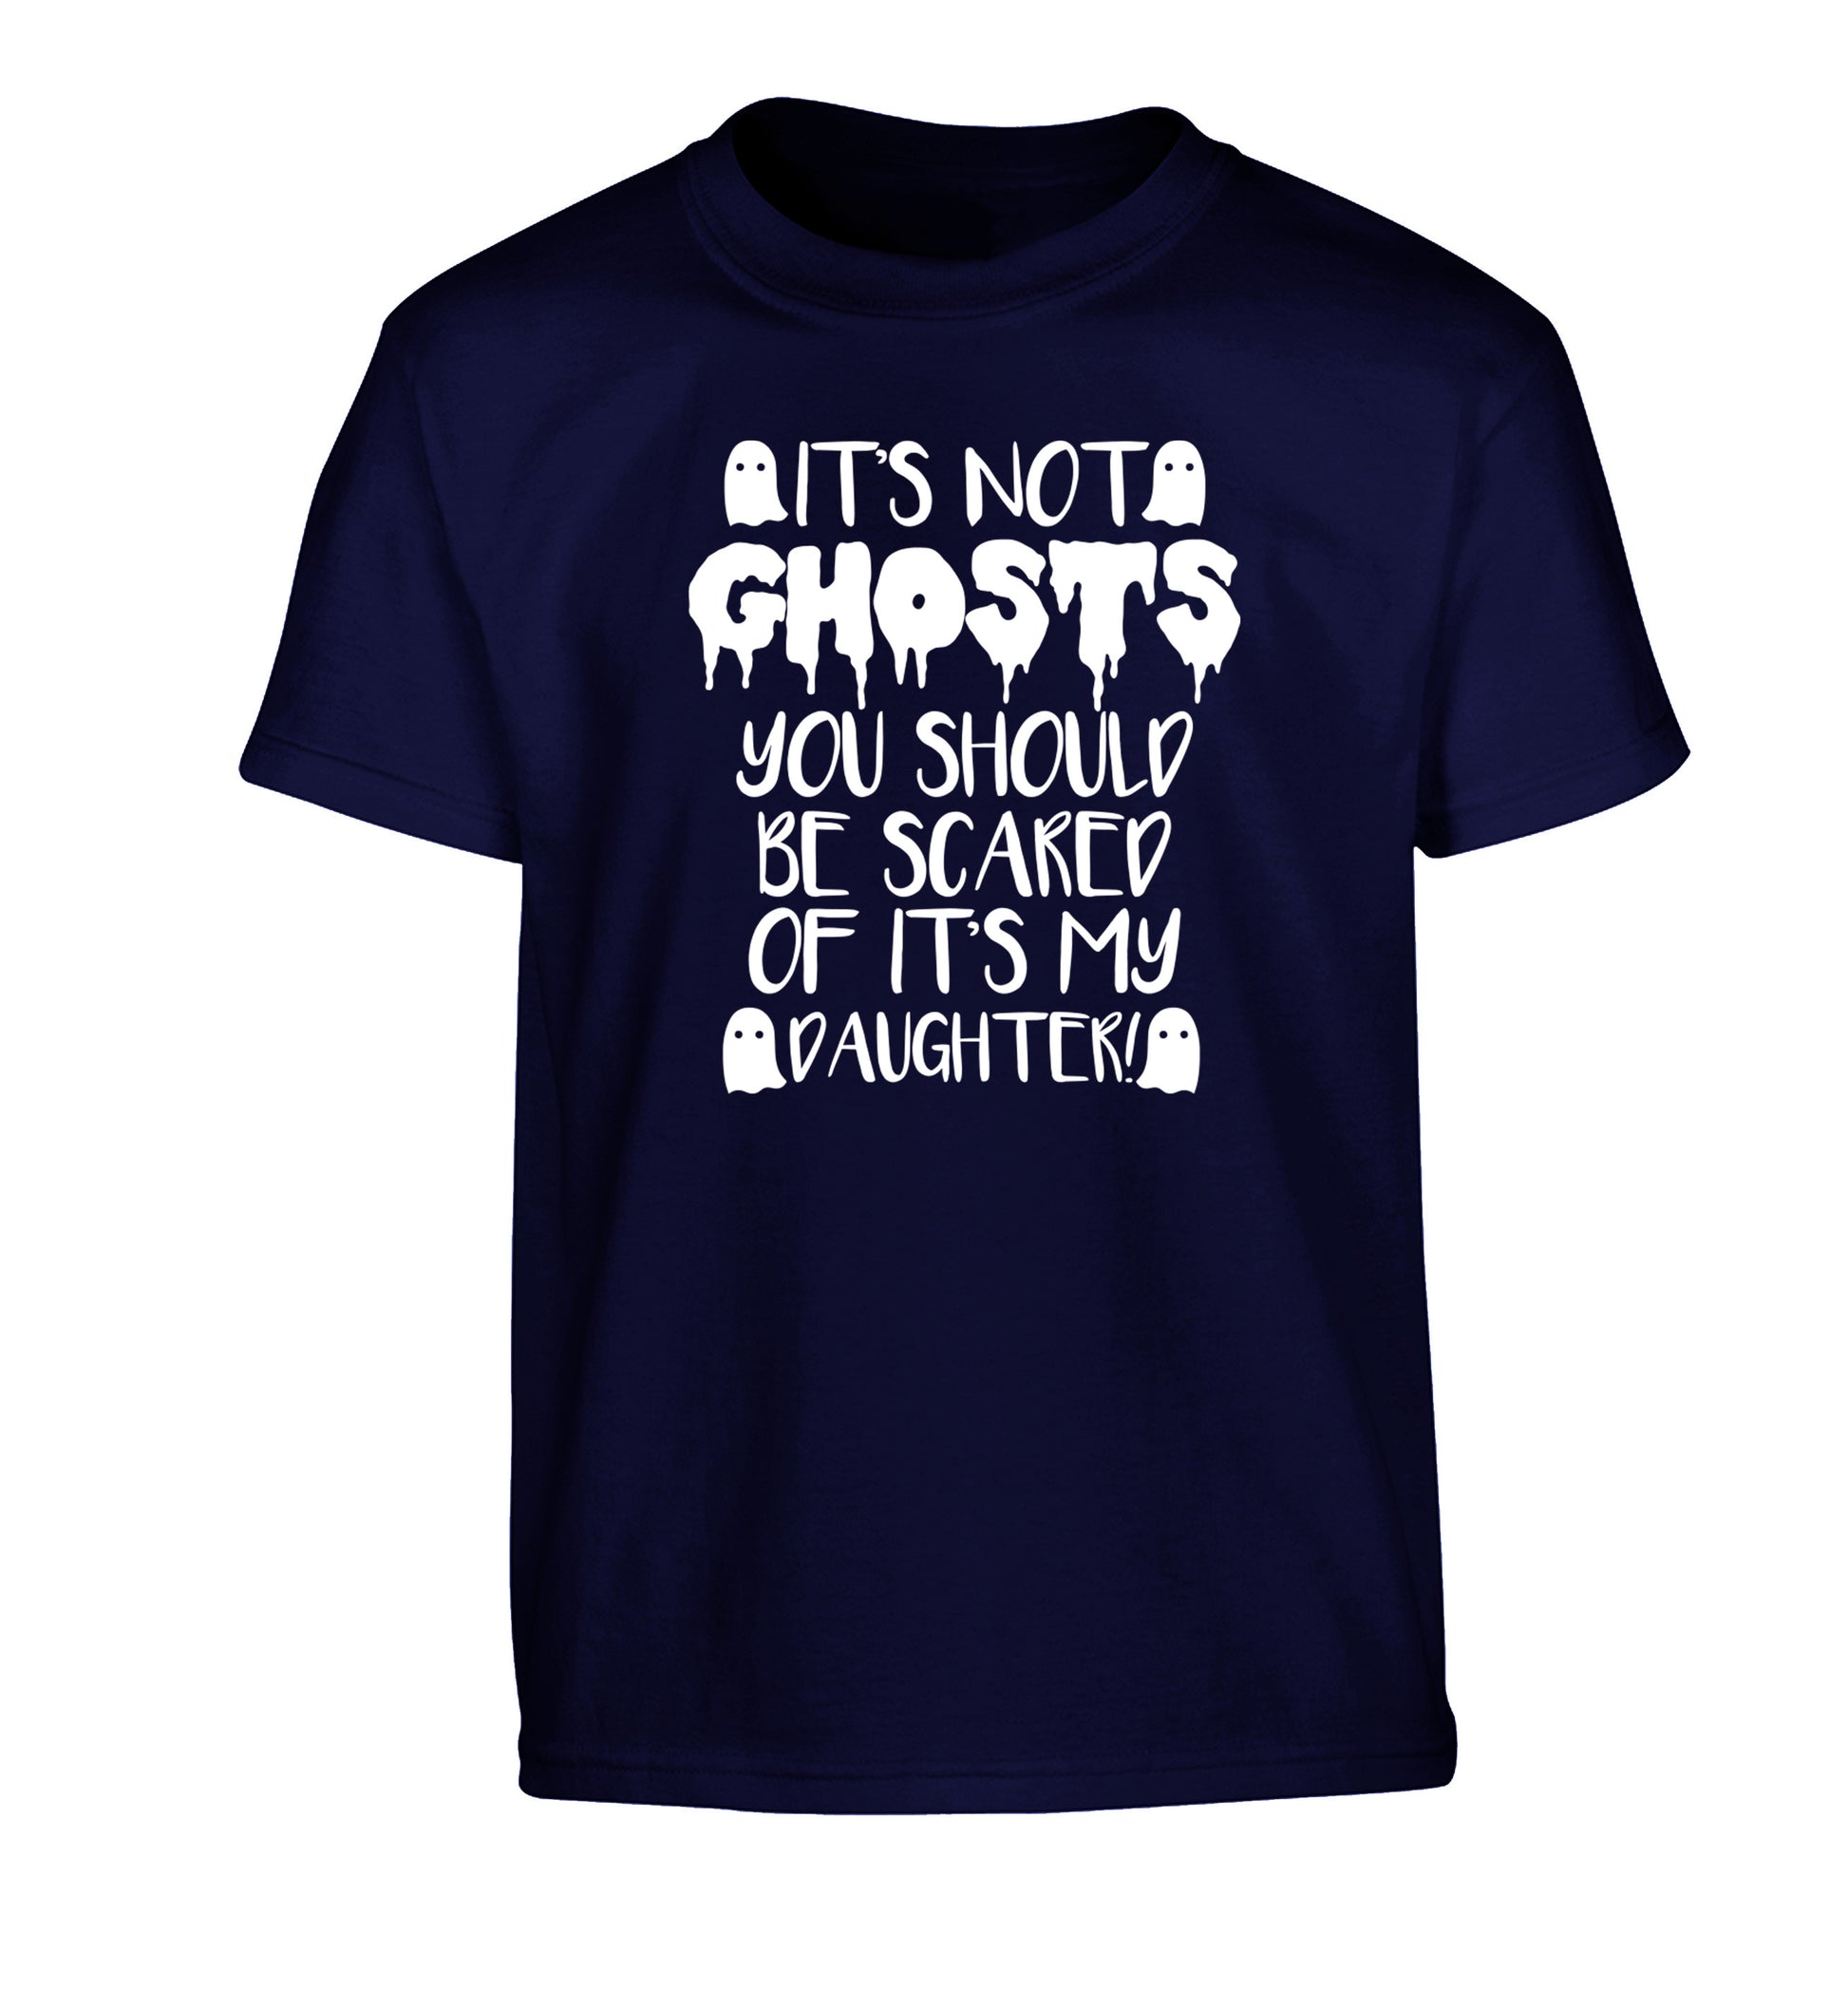 It's not ghosts you should be scared of it's my daughter! Children's navy Tshirt 12-14 Years